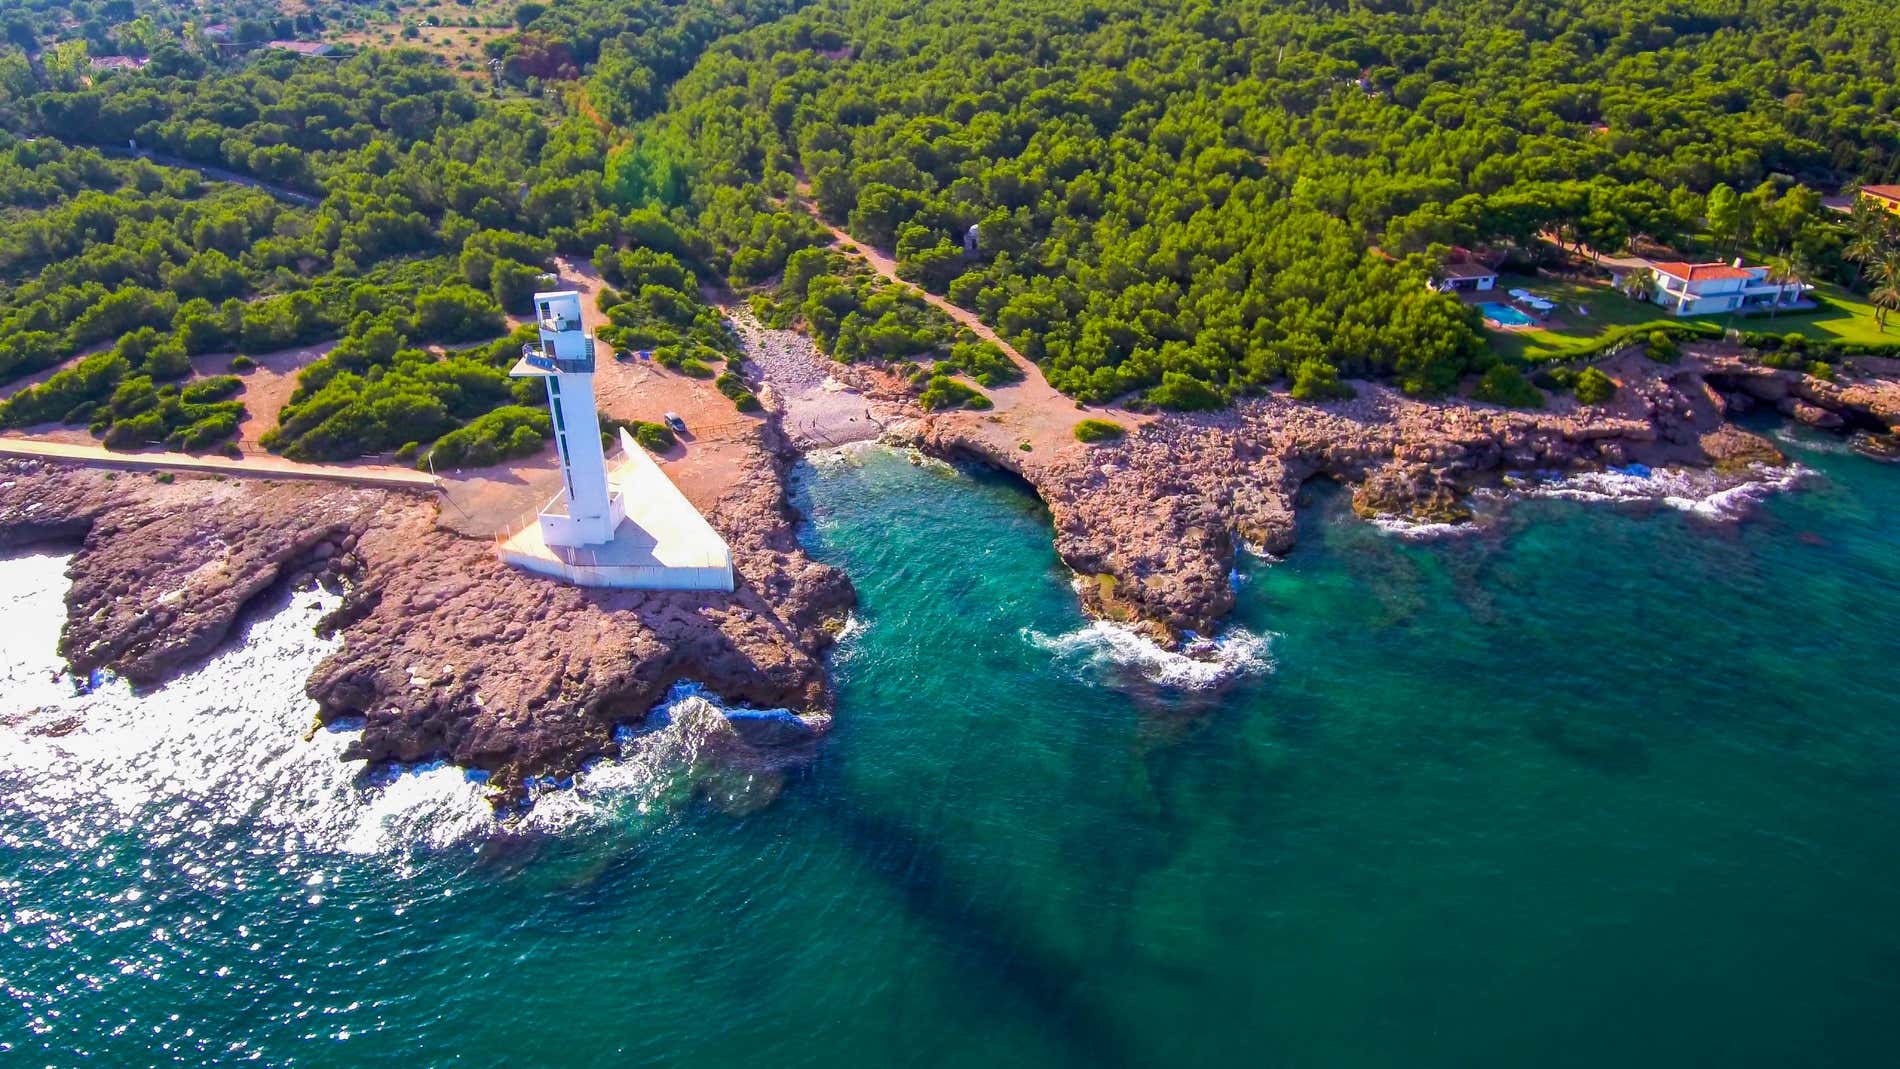 Aerial shot over a rocky coast with a small white lighthouse surrounded by many green trees